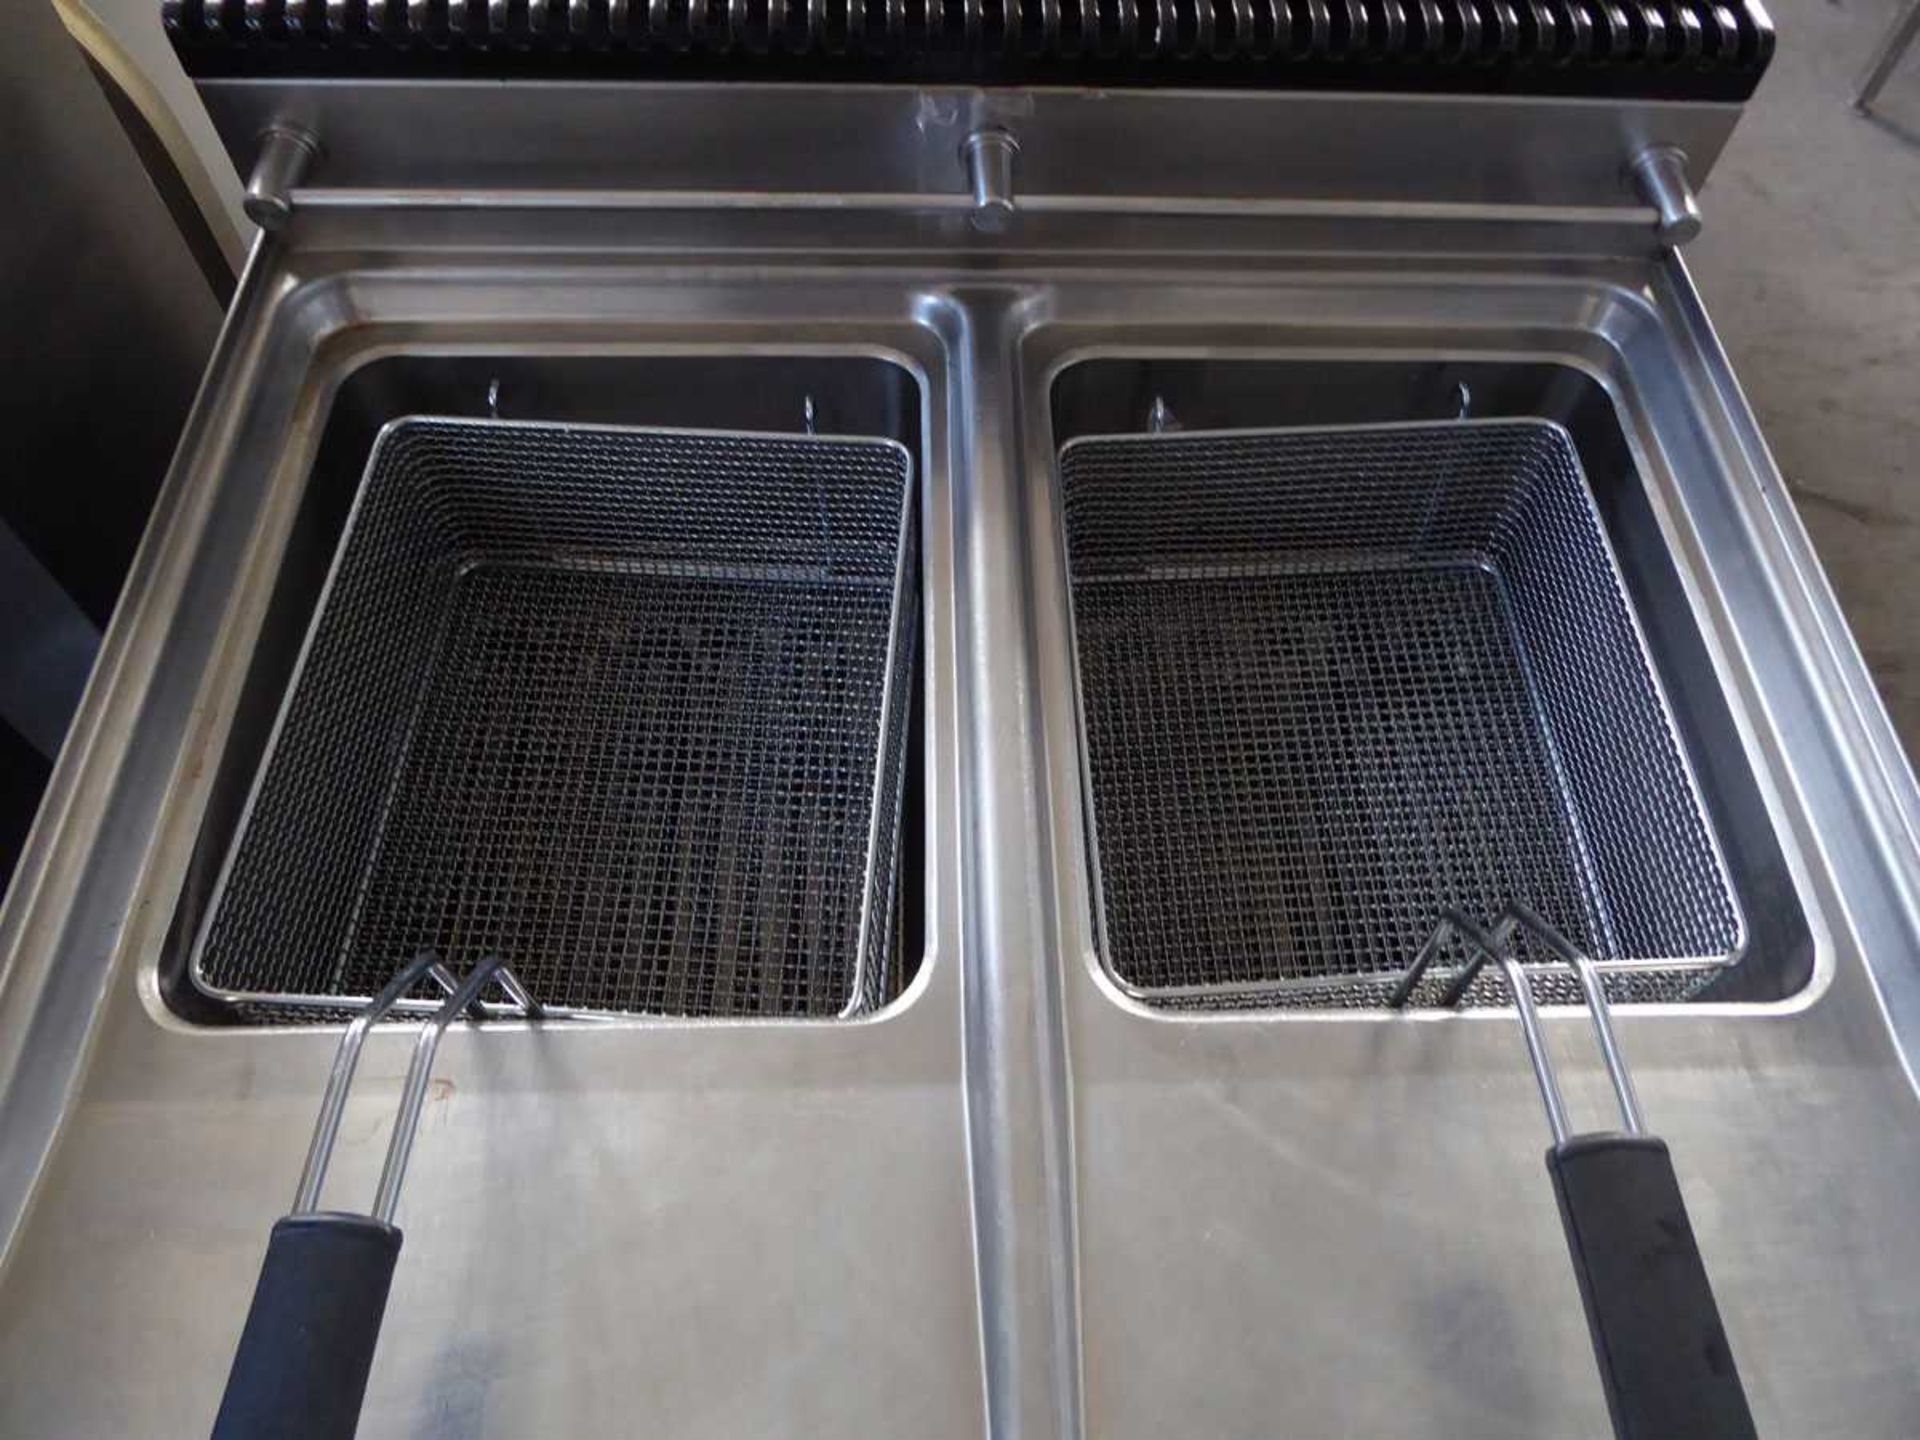 70cm electric NBN twin tank fryer with 2 baskets - Image 2 of 3